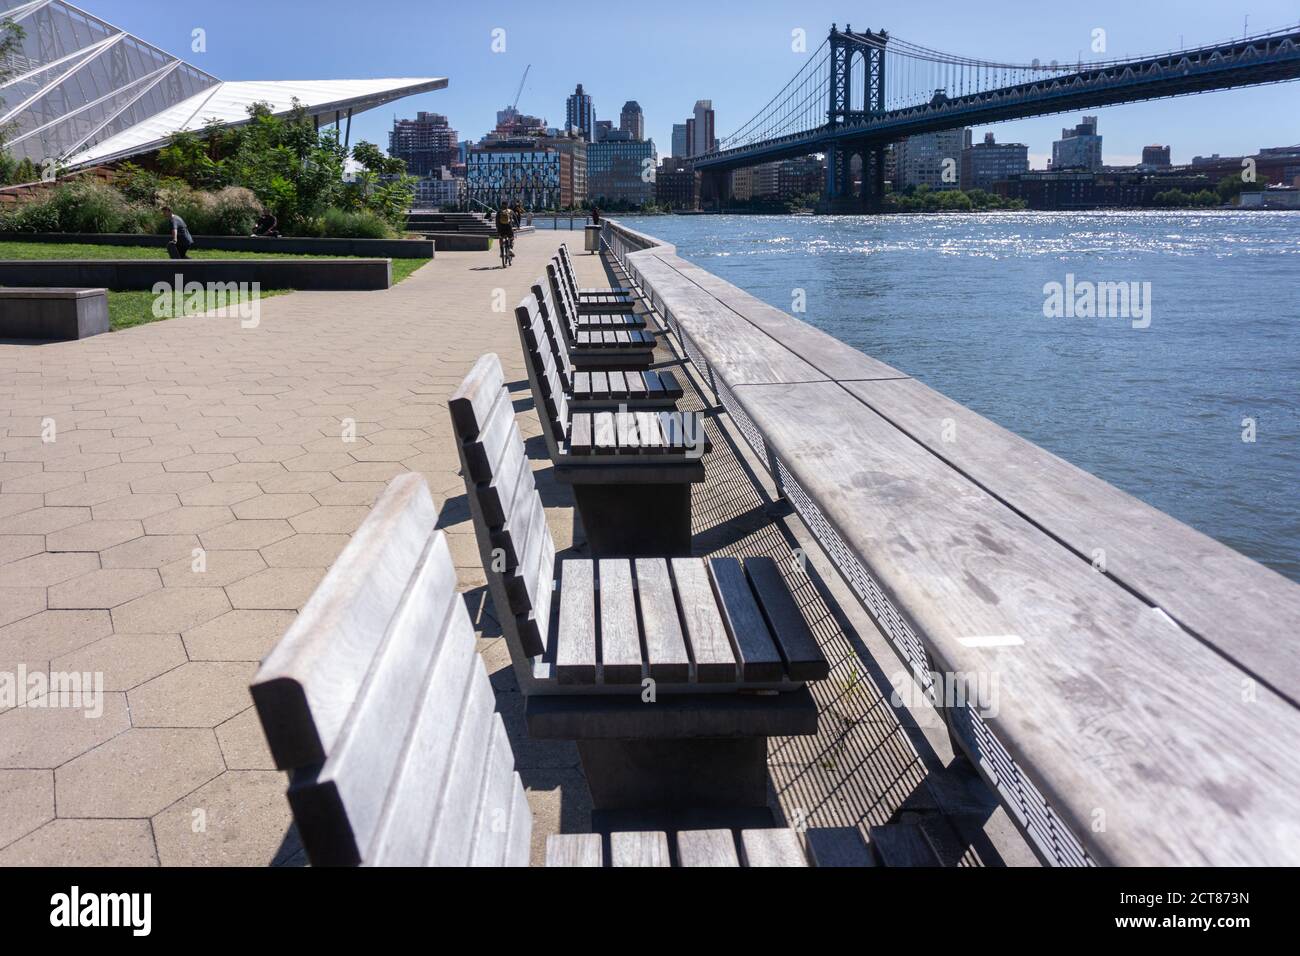 Pier 35 at East River Waterfront. Empty wooden benches along pier on Lower East Side, NYC Stock Photo